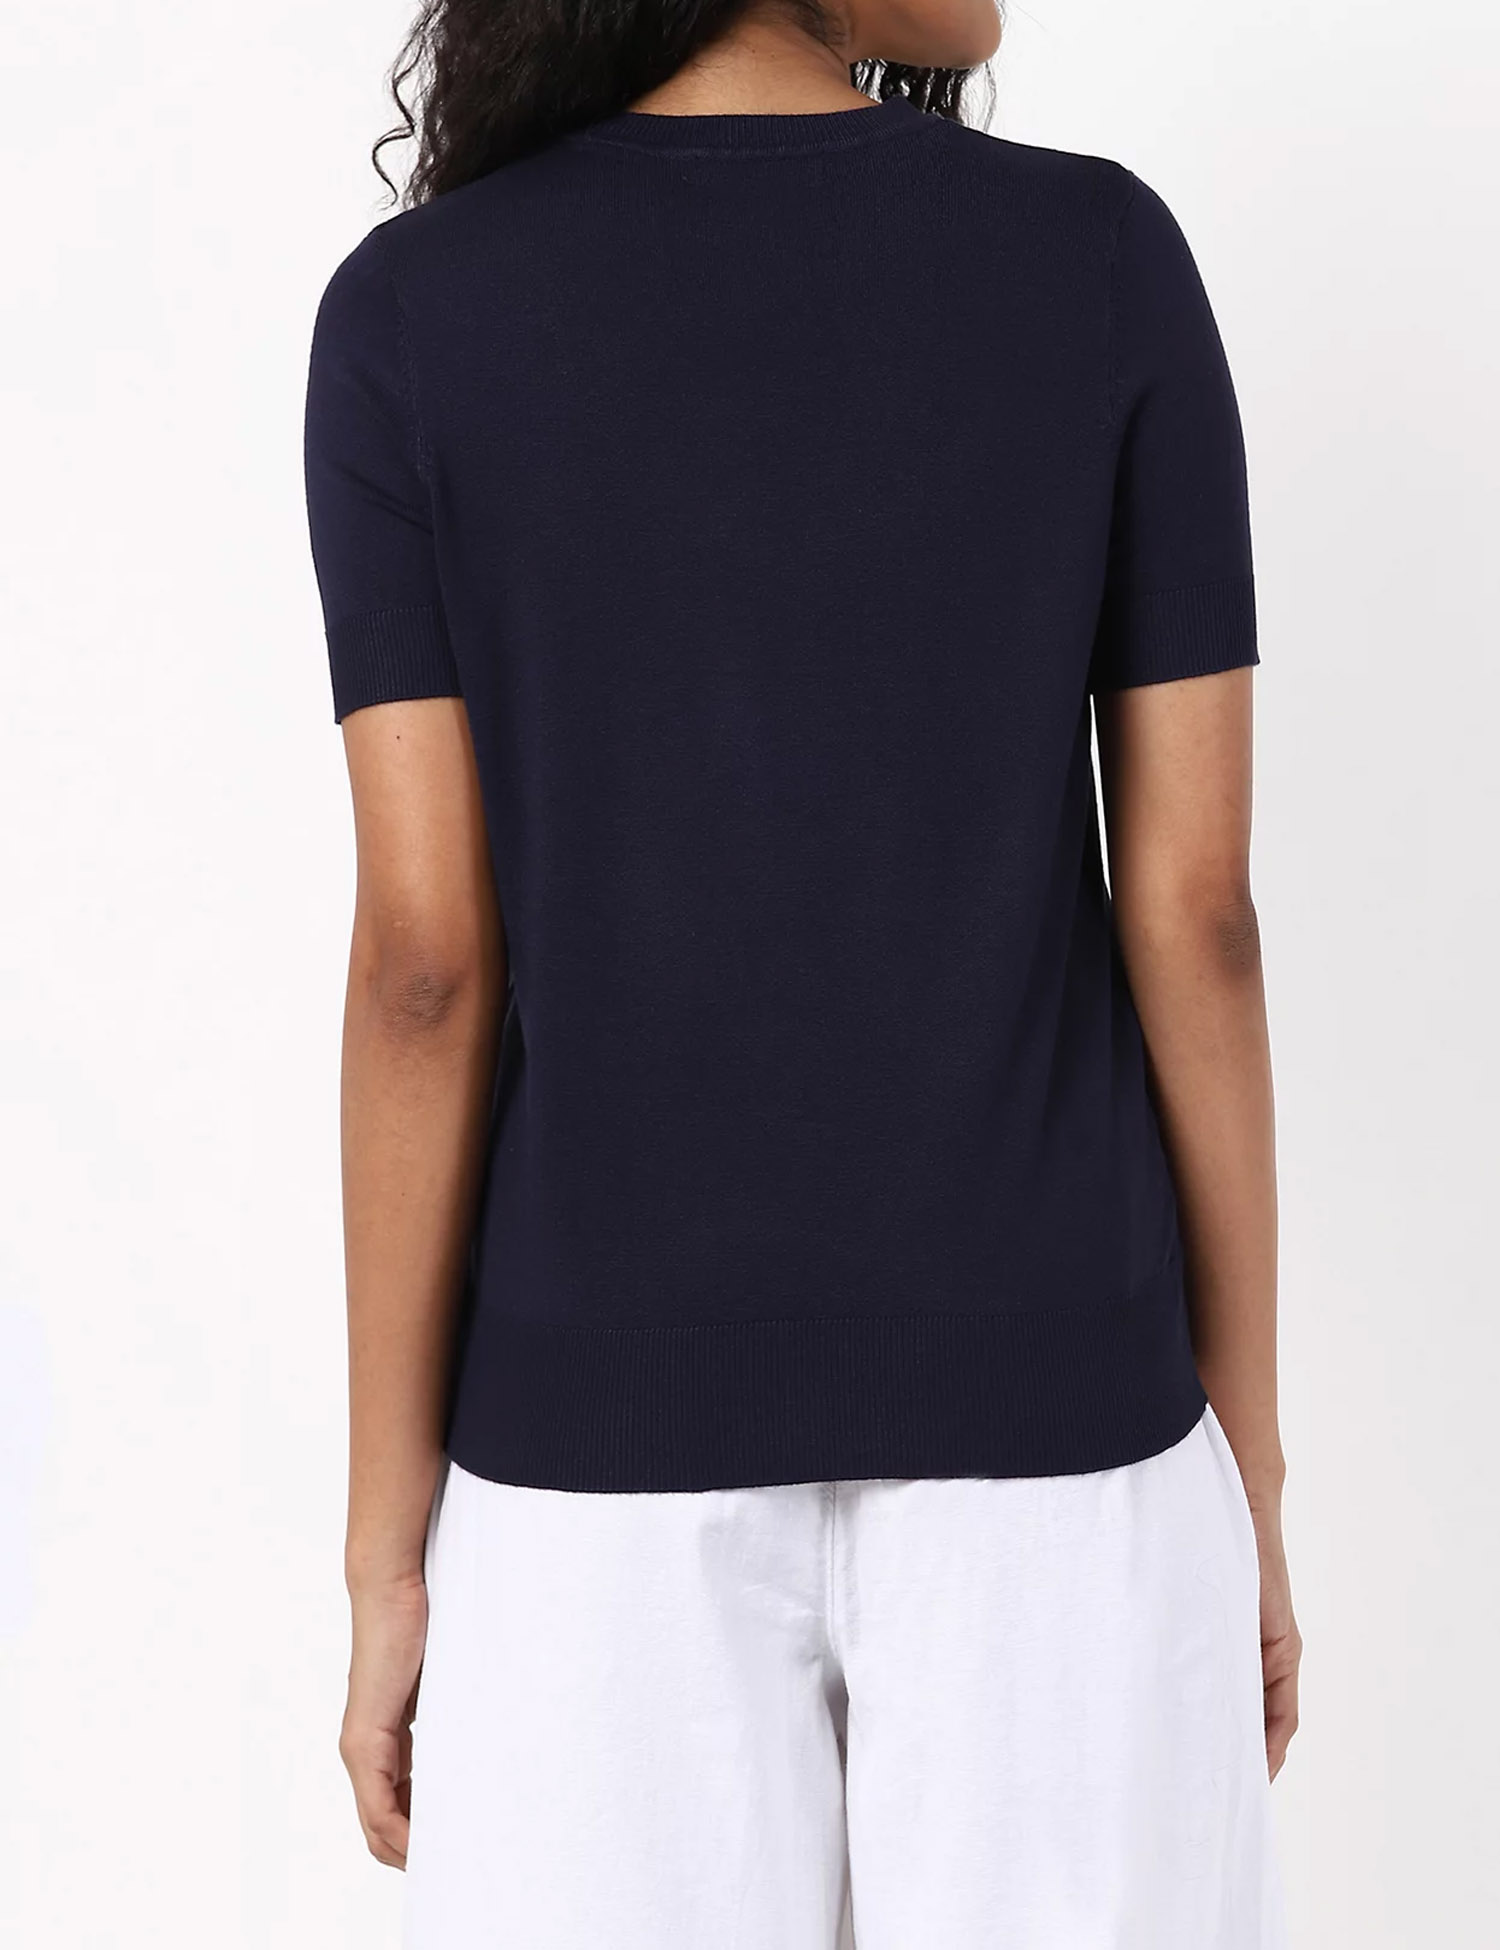 Marks and Spencer - - M&5 NAVY Knitted Crew Neck Short Sleeve Top ...